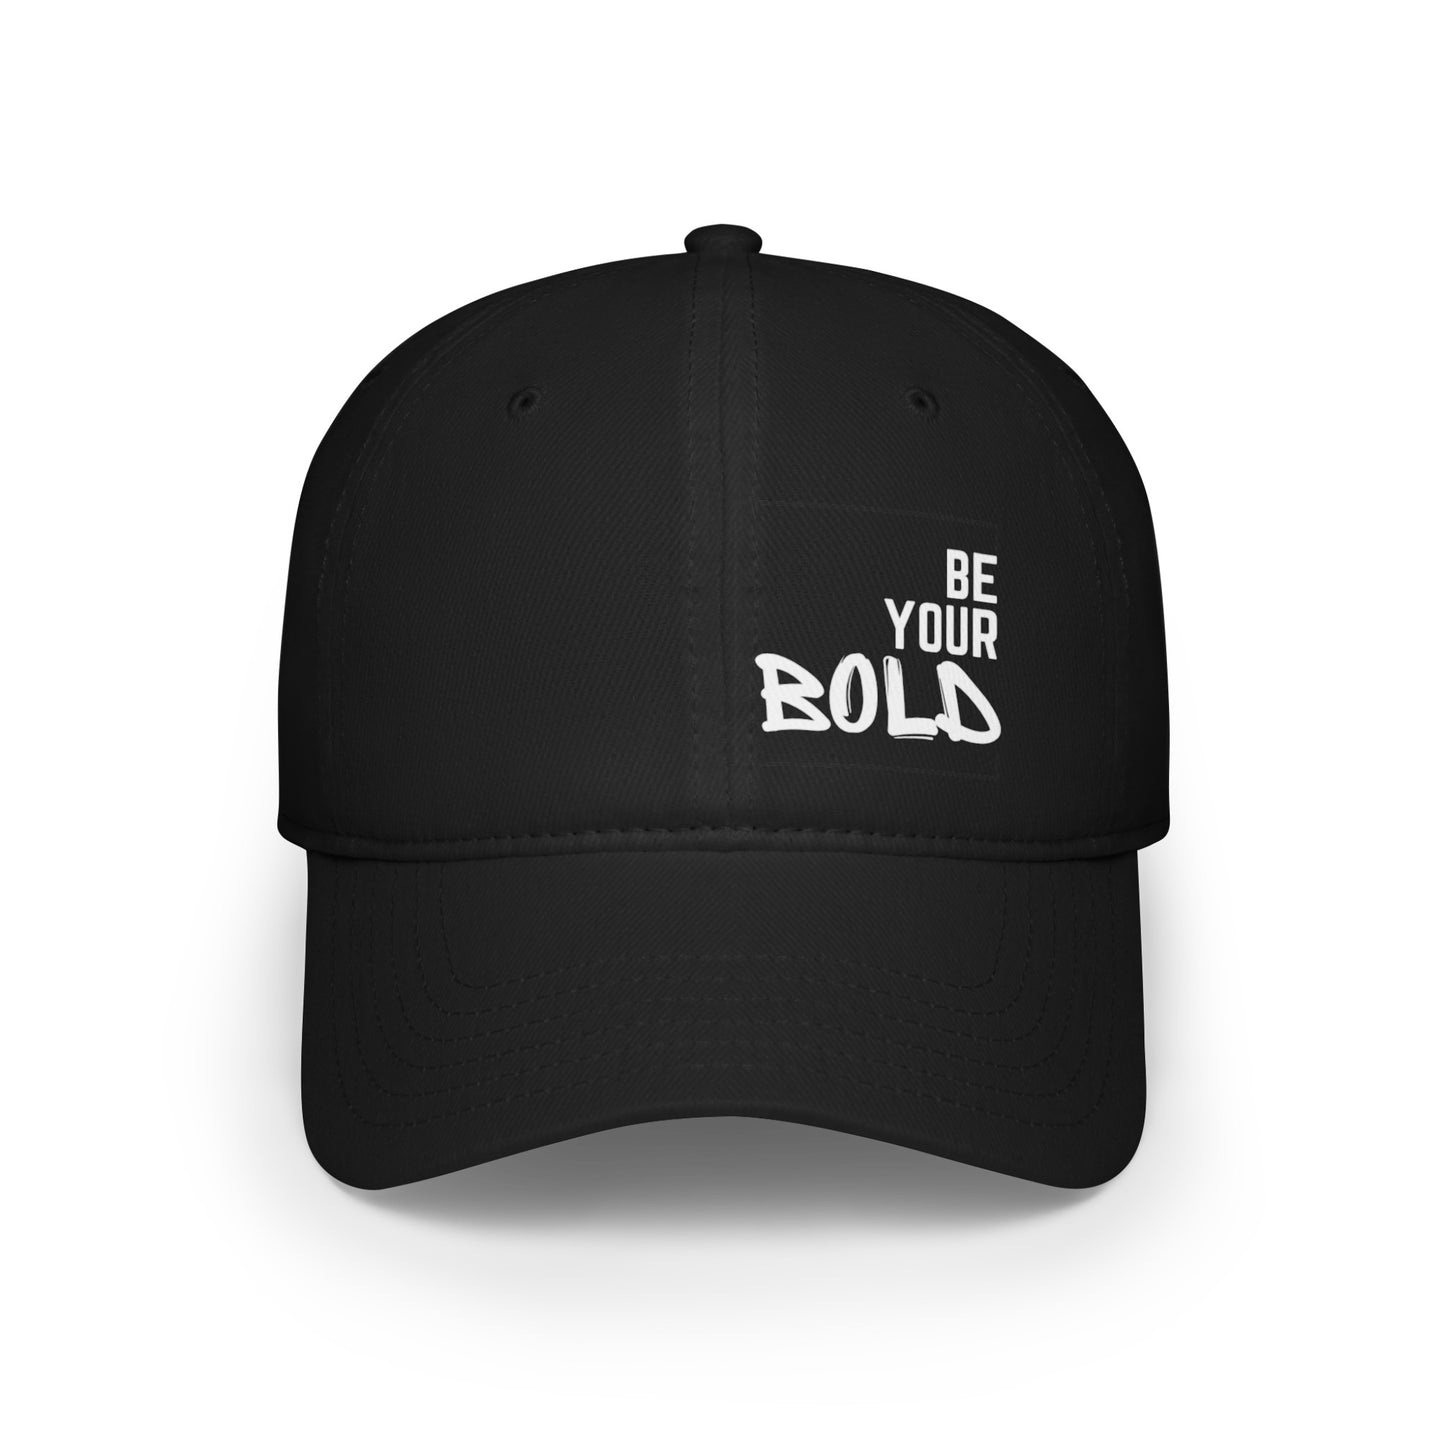 Be your Bold (2) Low Profile Baseball Cap